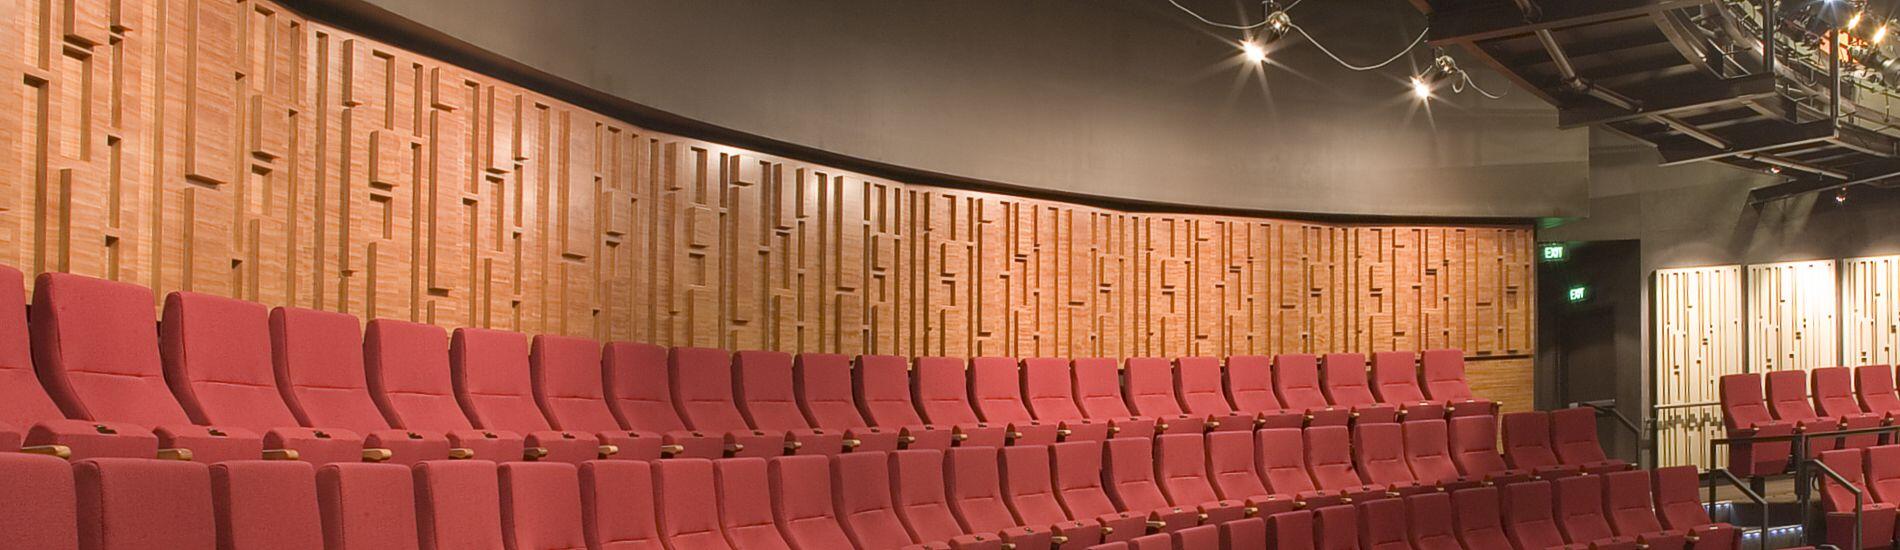 Customised SUPACOUSTIC diffusion panels address acoustics in school theatre